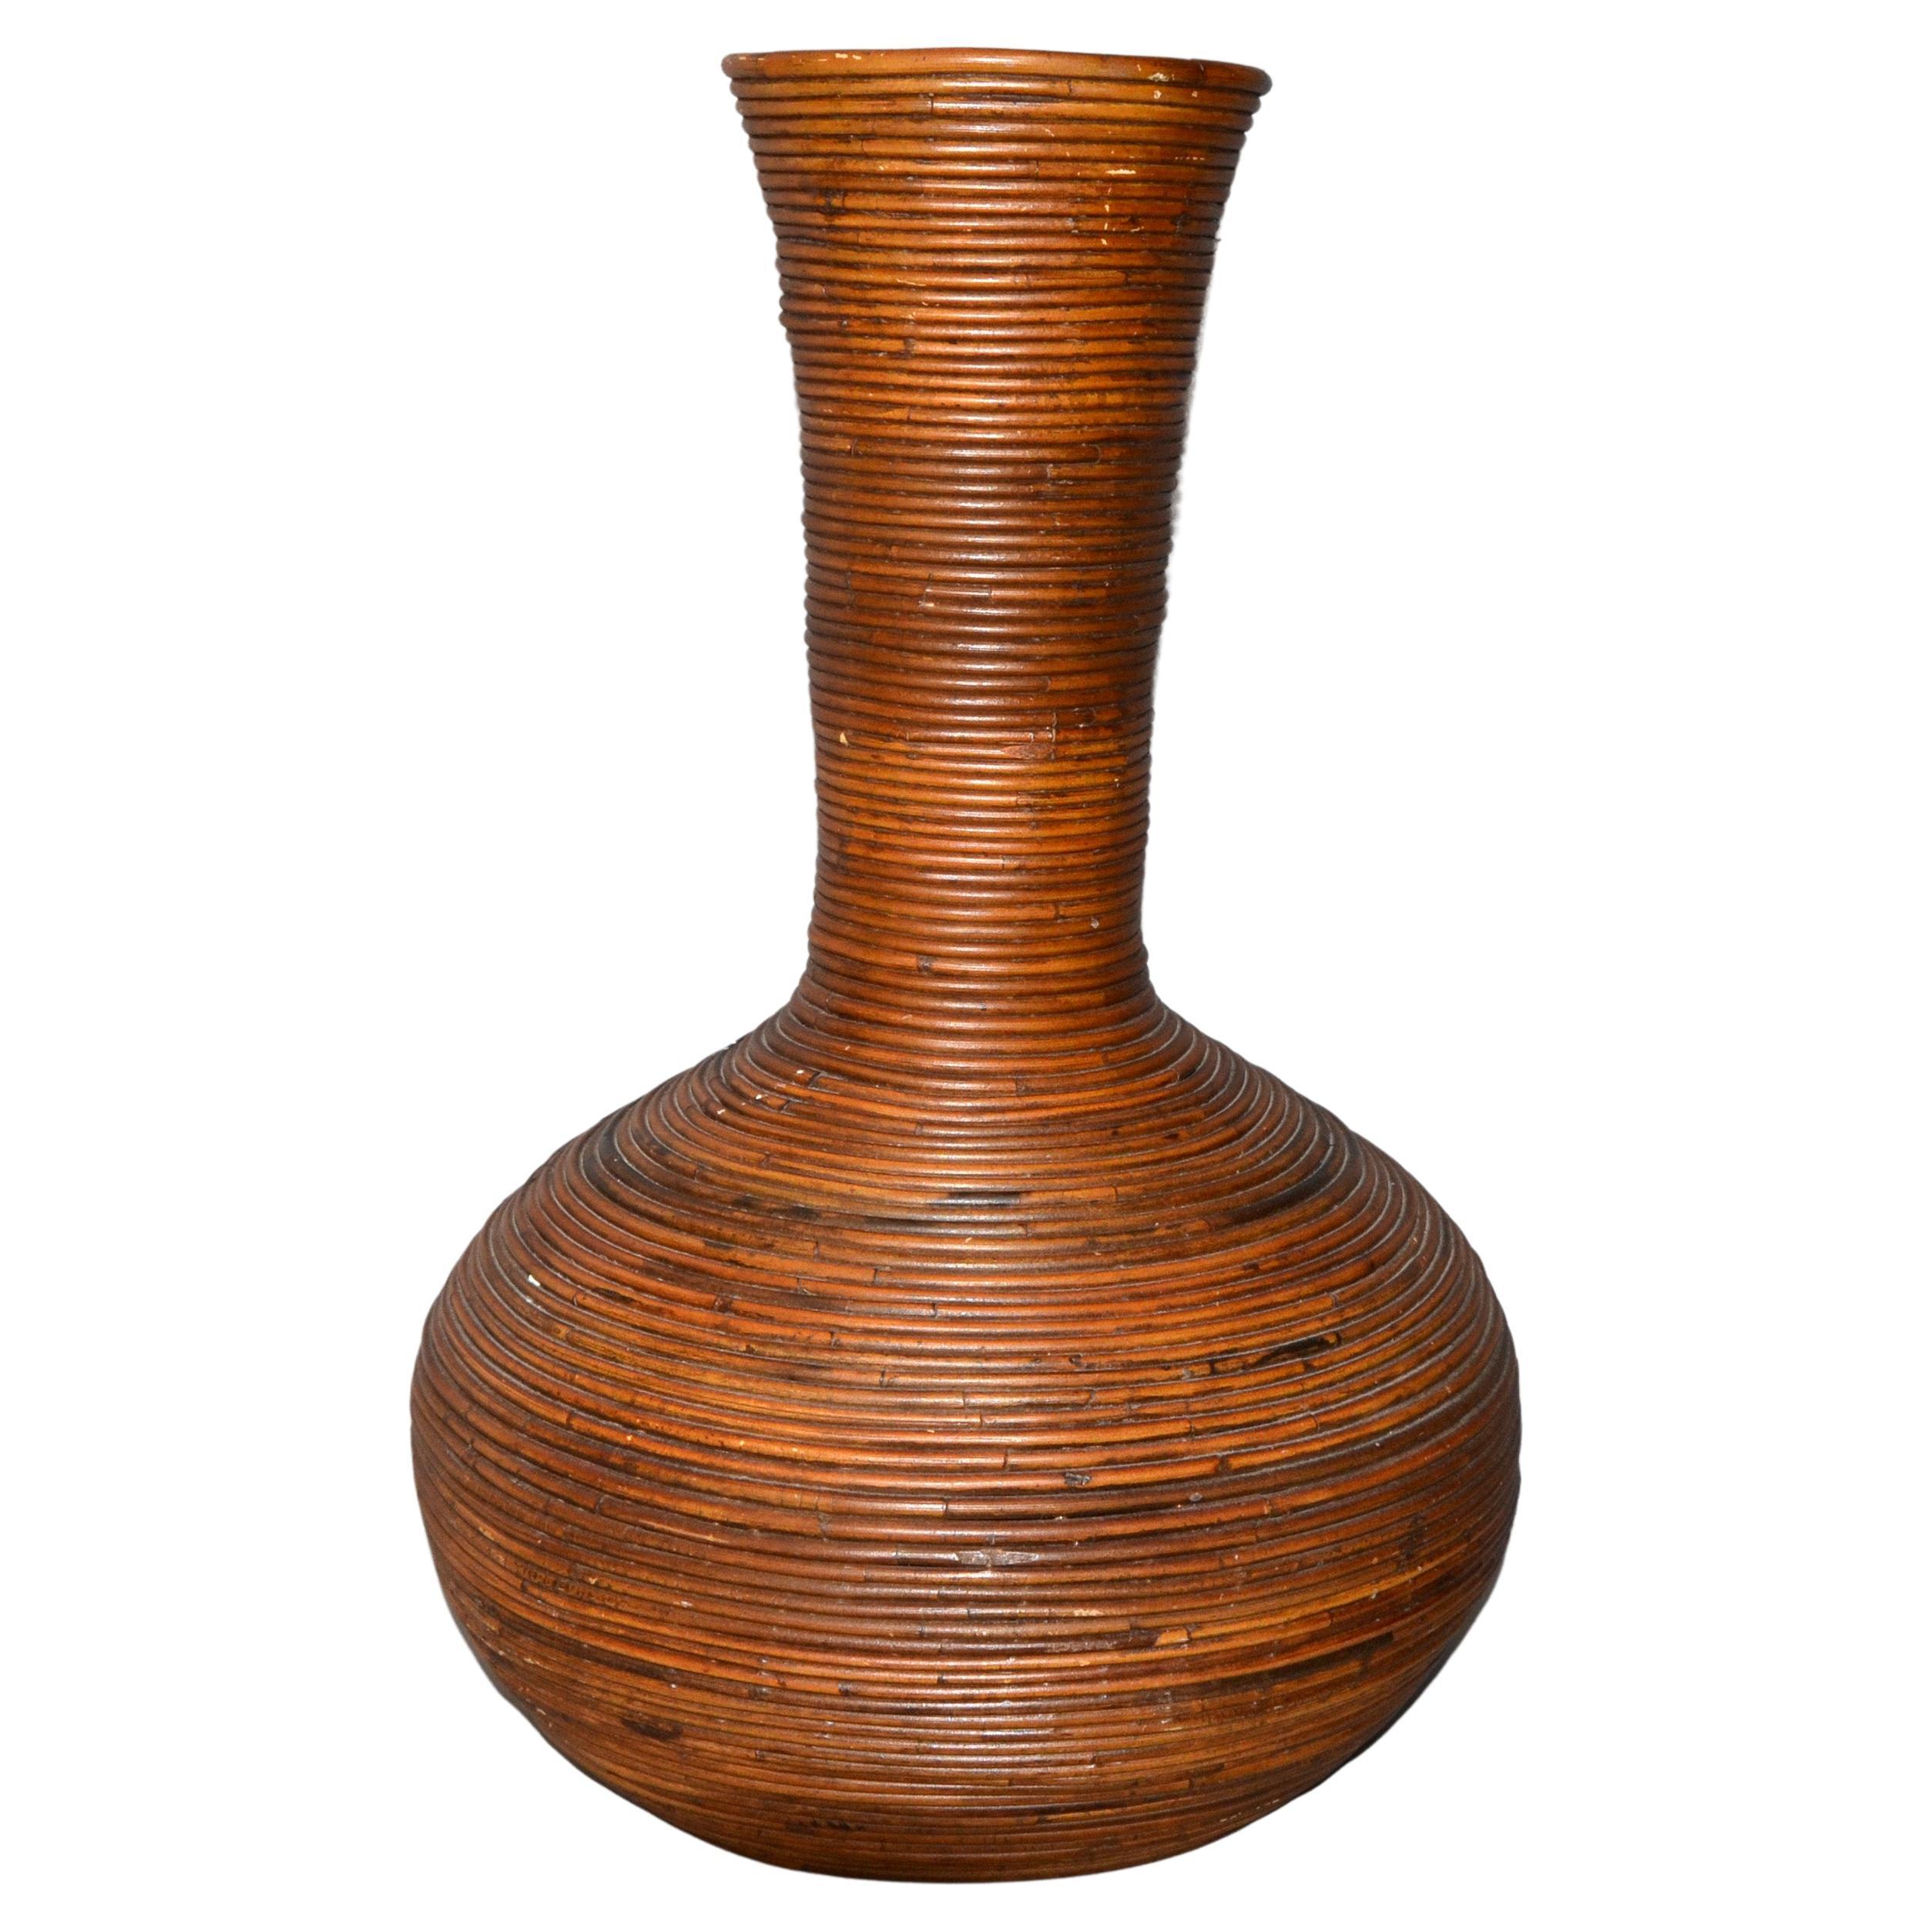 Grand vase de sol Bohème Tan Pencil Reed Bamboo Handcrafted Tall Round Shape Floor Vase